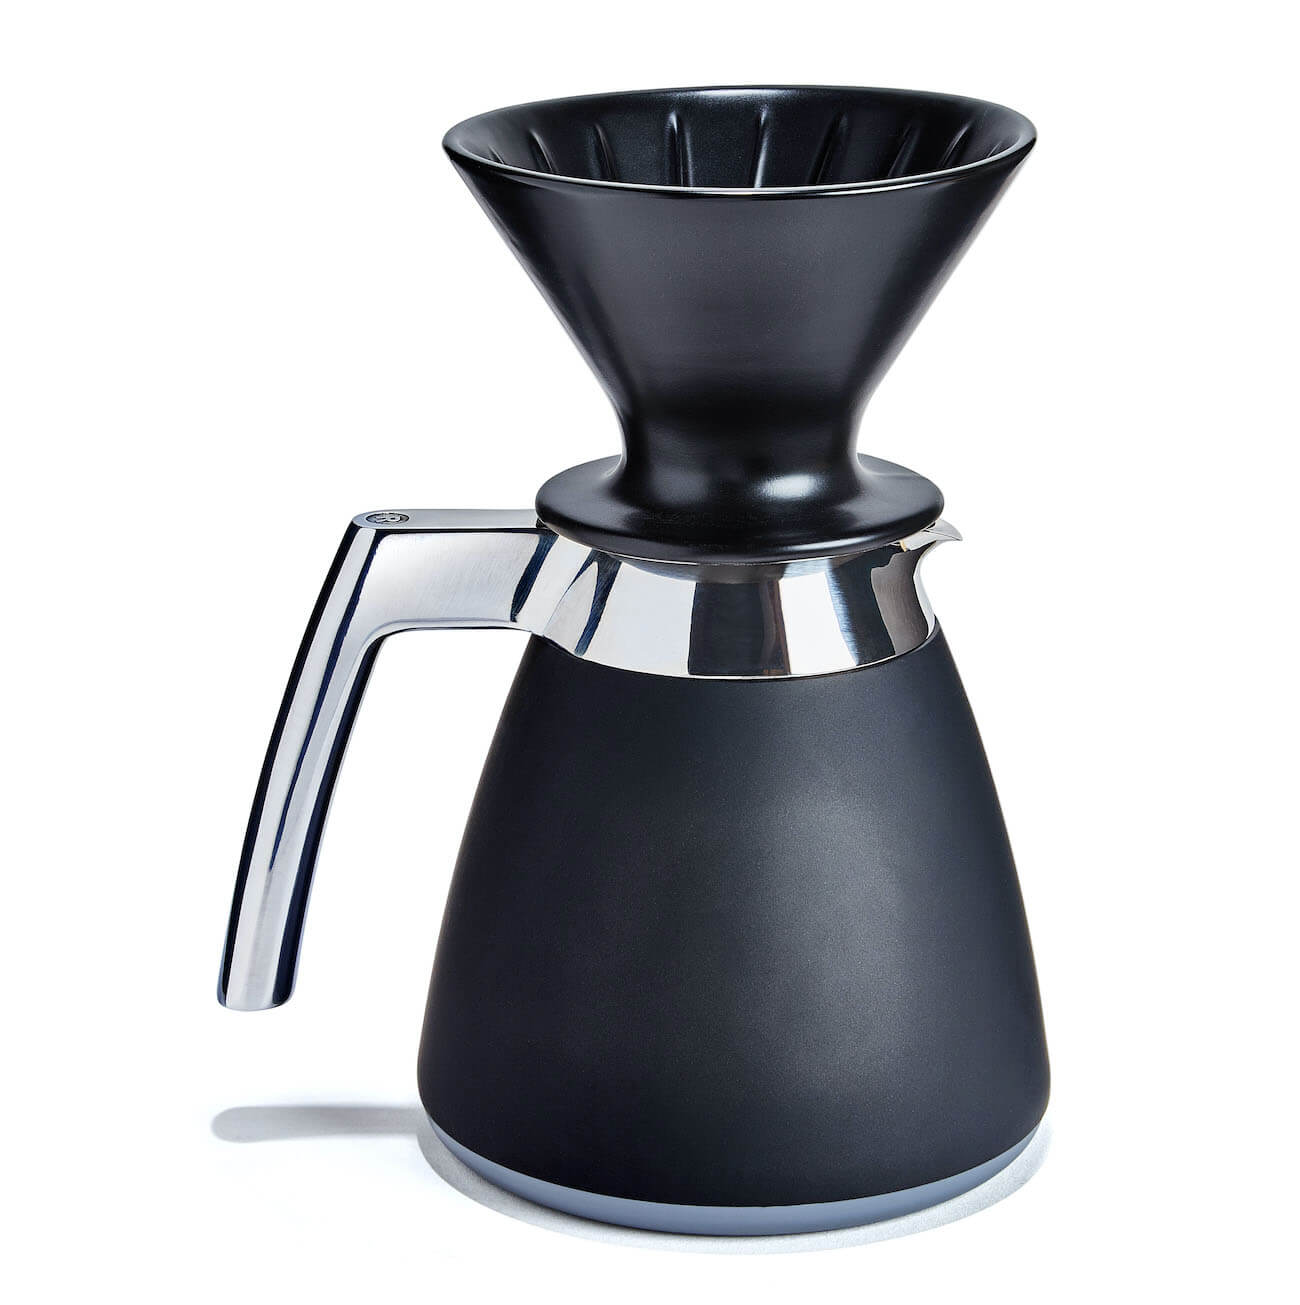 Thermal Carafe - Hot Coffee All Day